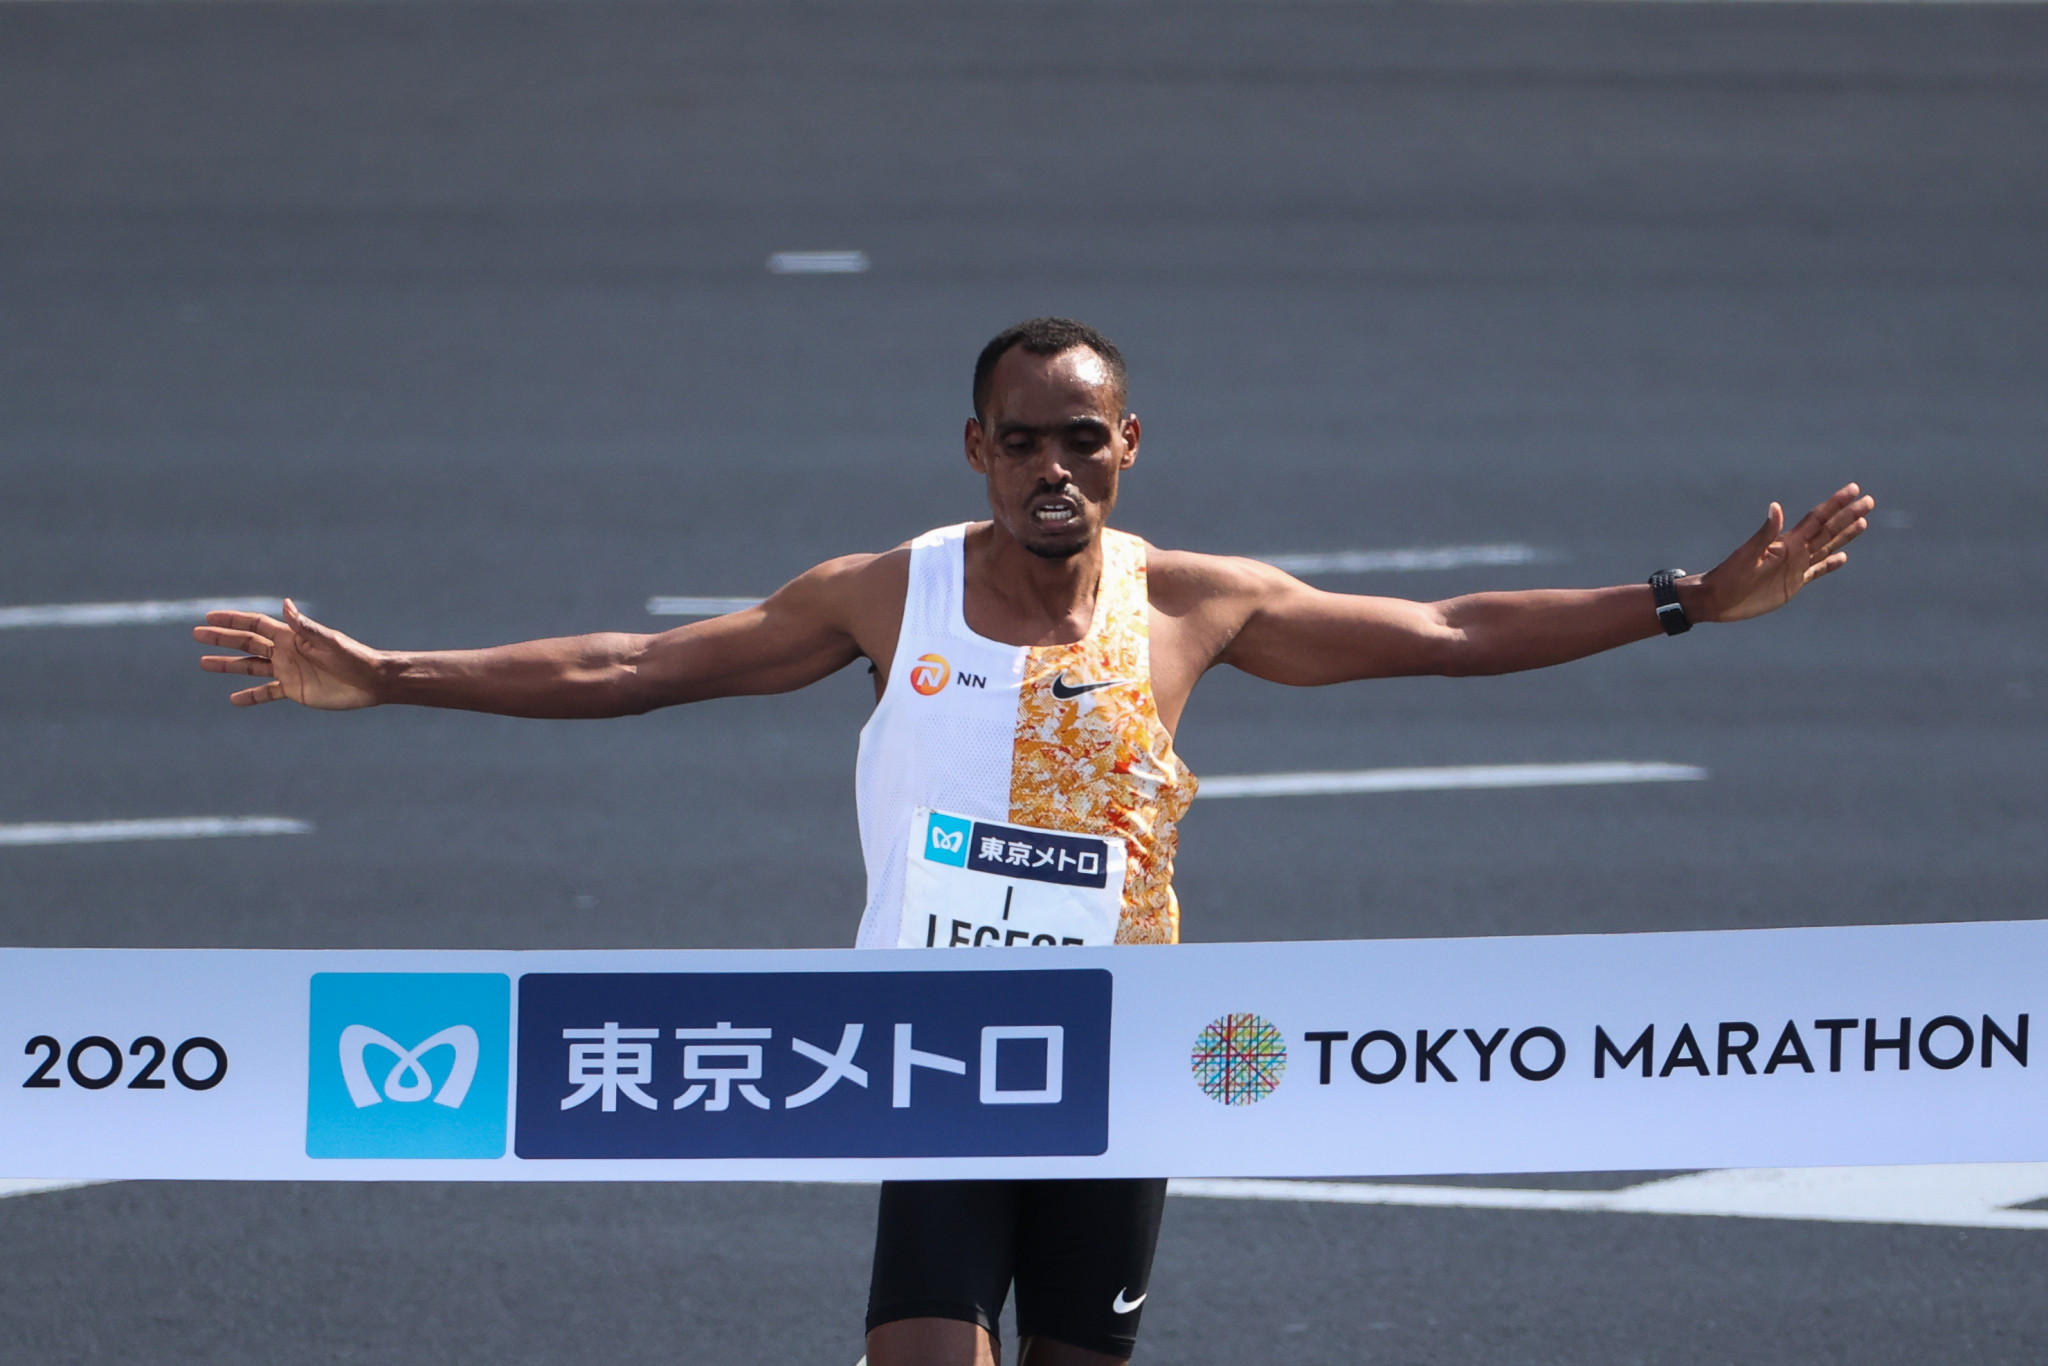 The Tokyo Marathon is one of the few long-distance races to have gone ahead in 2020 ©Getty Images